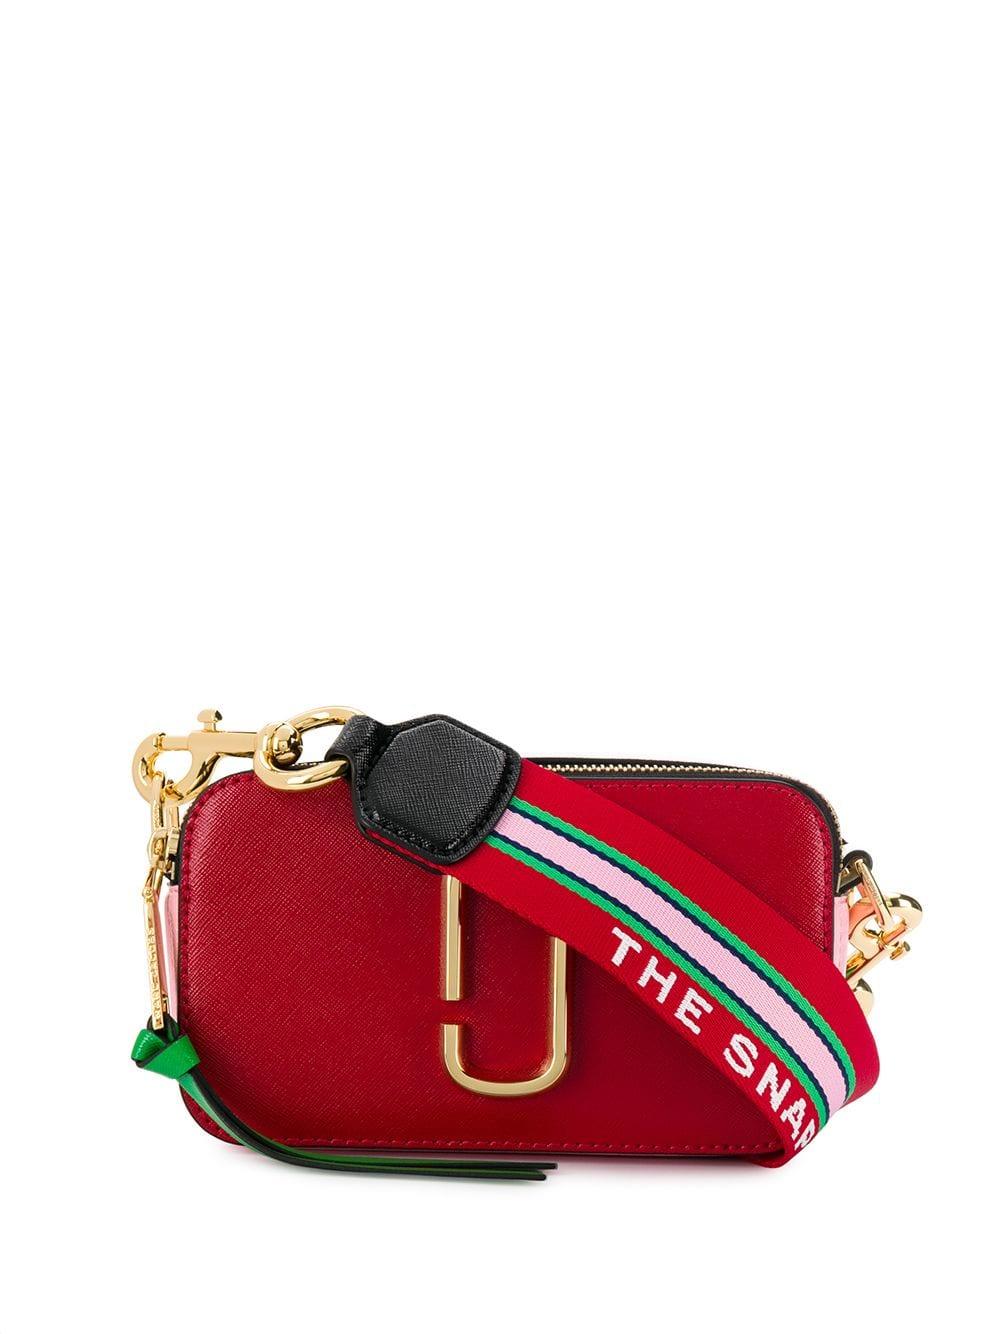 Marc Jacobs Black & Red Snapshot Leather Crossbody Bag, Best Price and  Reviews